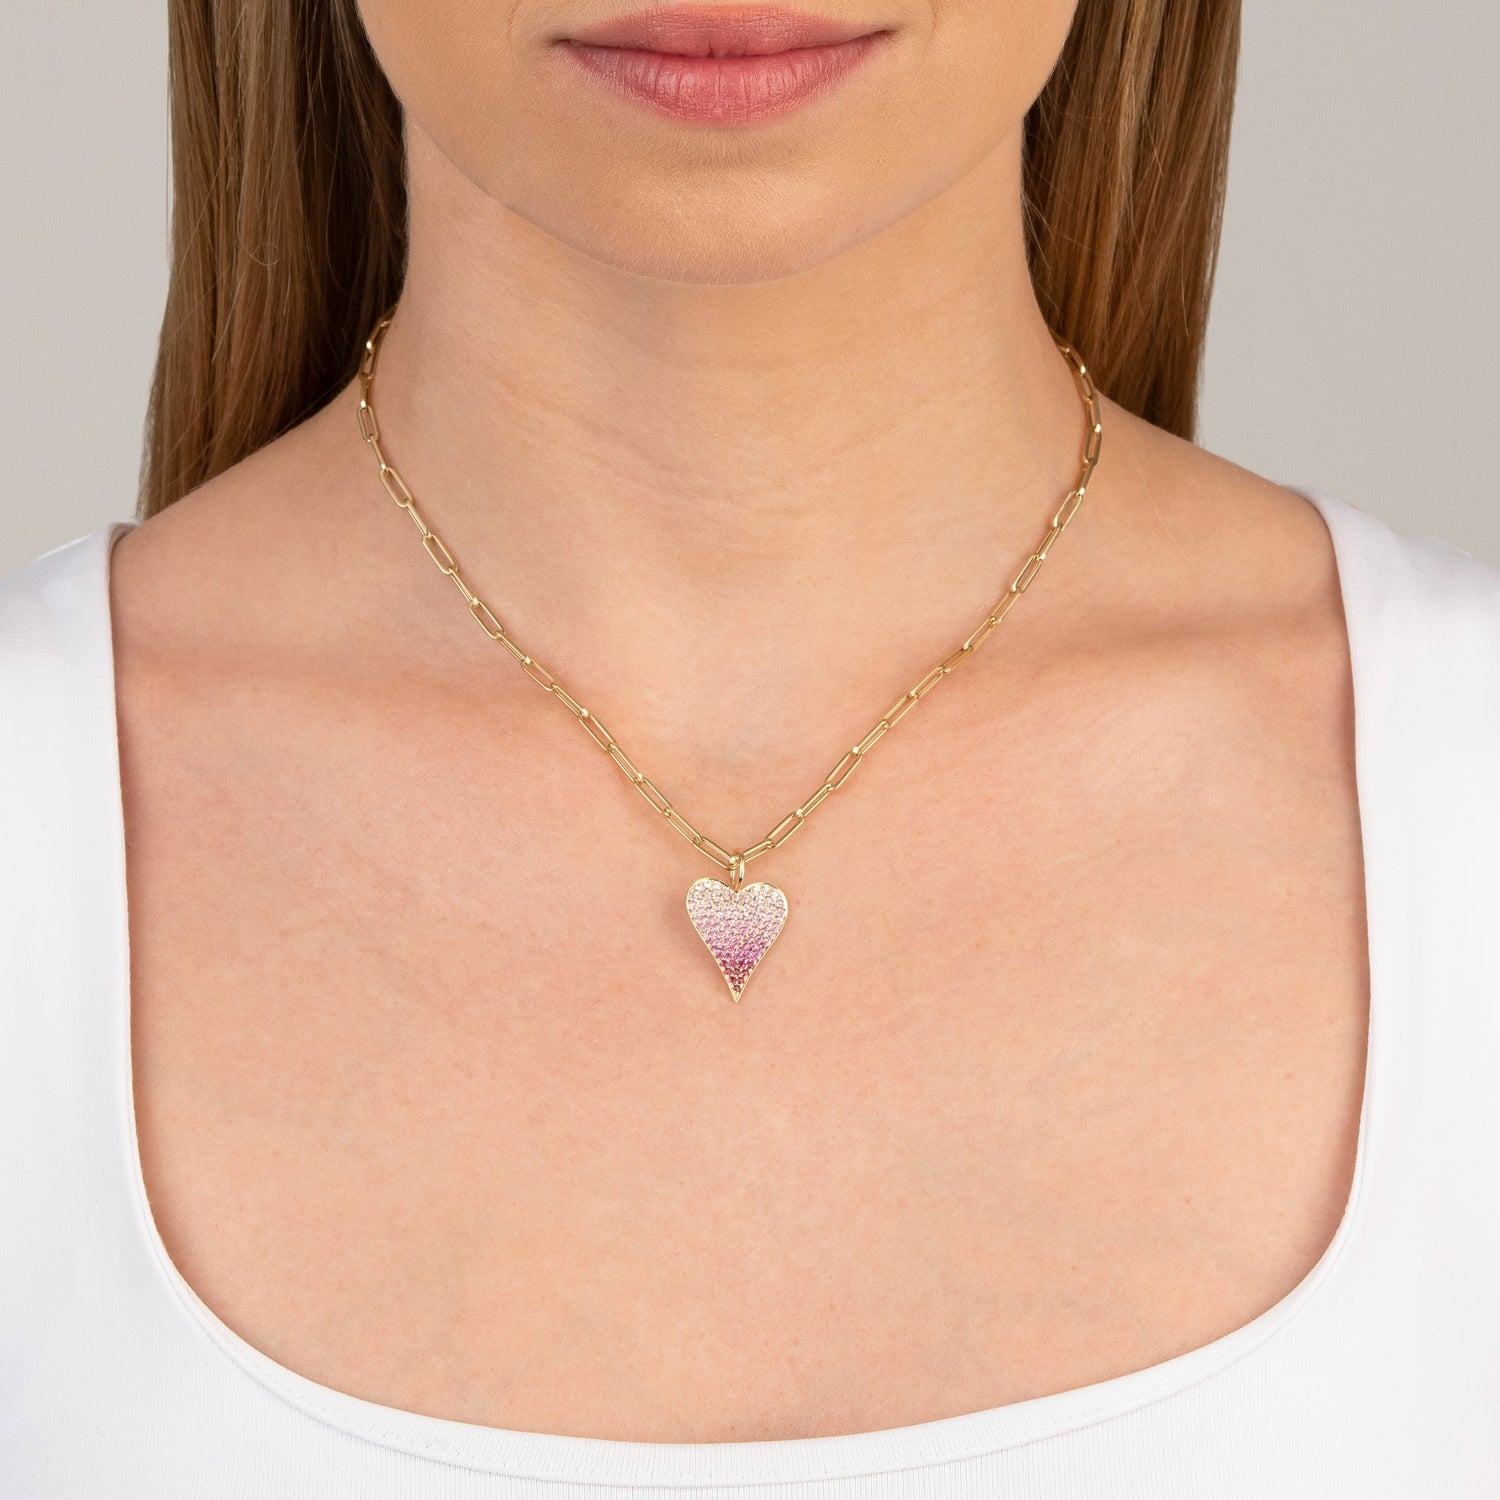 Ombre Pink Sapphire Necklace